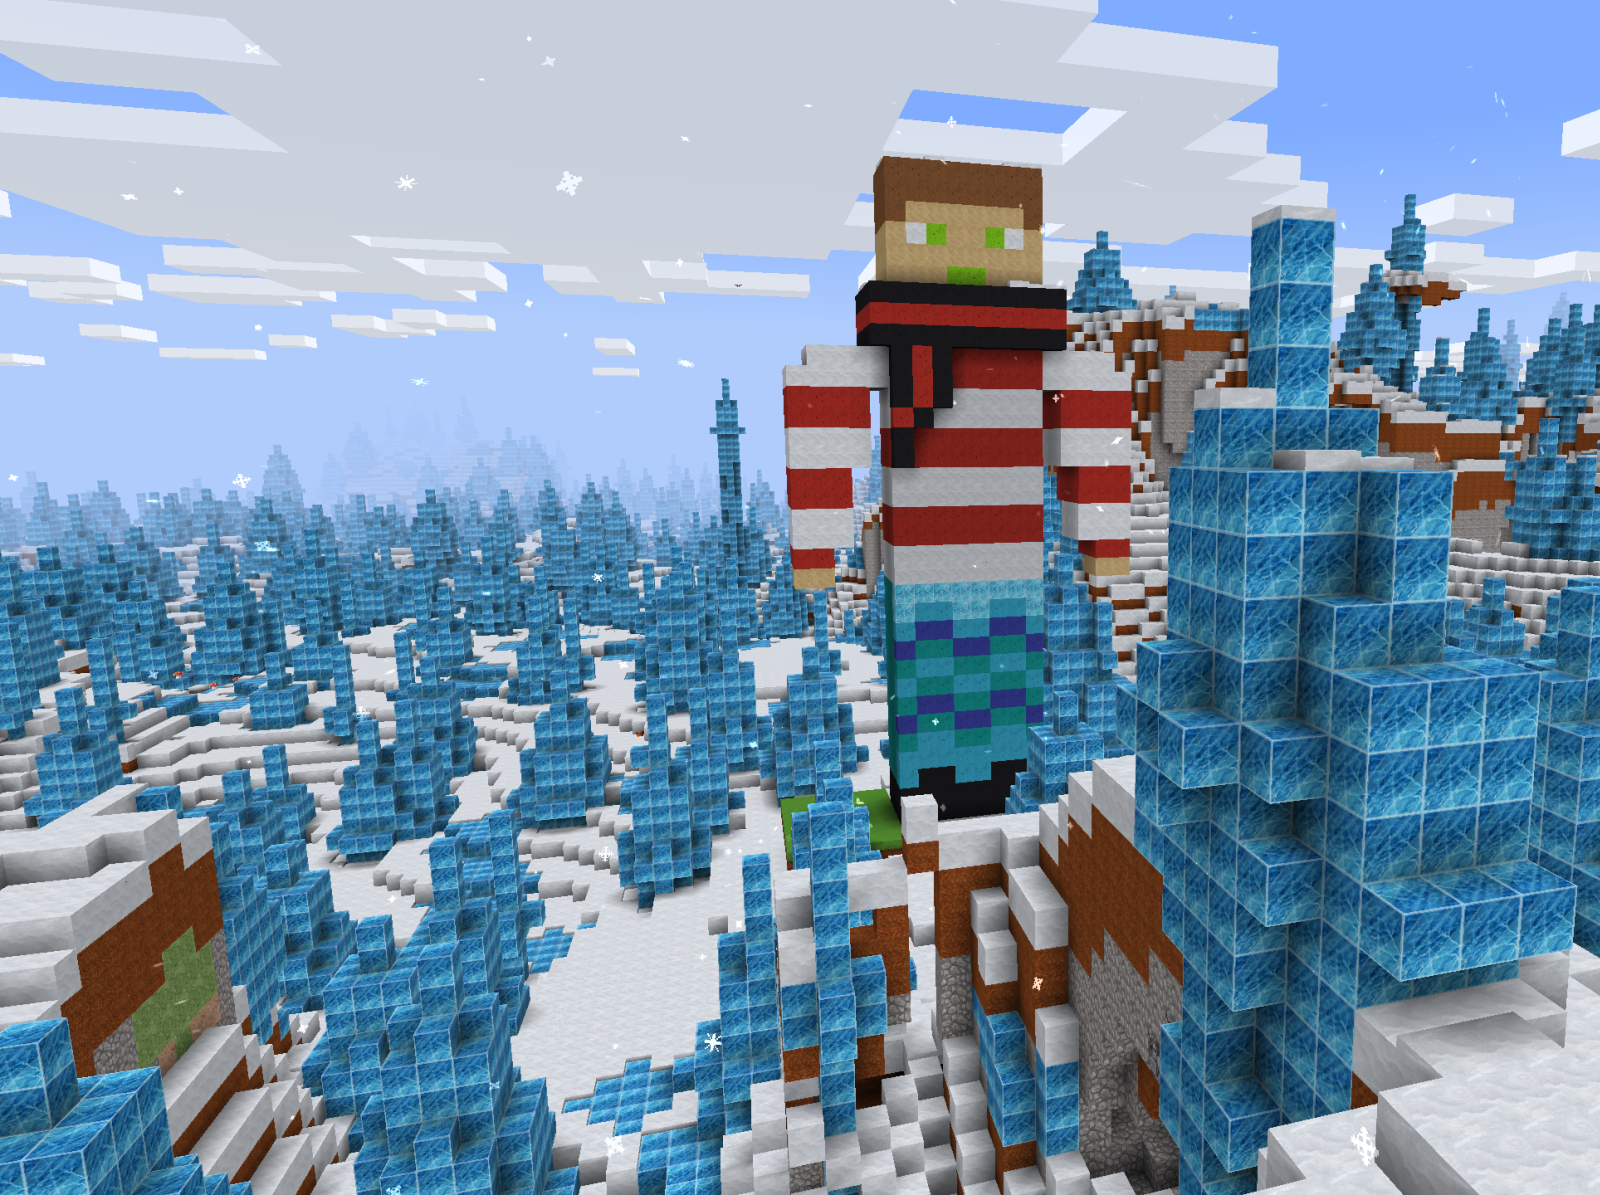 Minecraft Steve in Christmas Outfit in RealmCraft Free Minecraft by  Tellurion Mobile on Dribbble